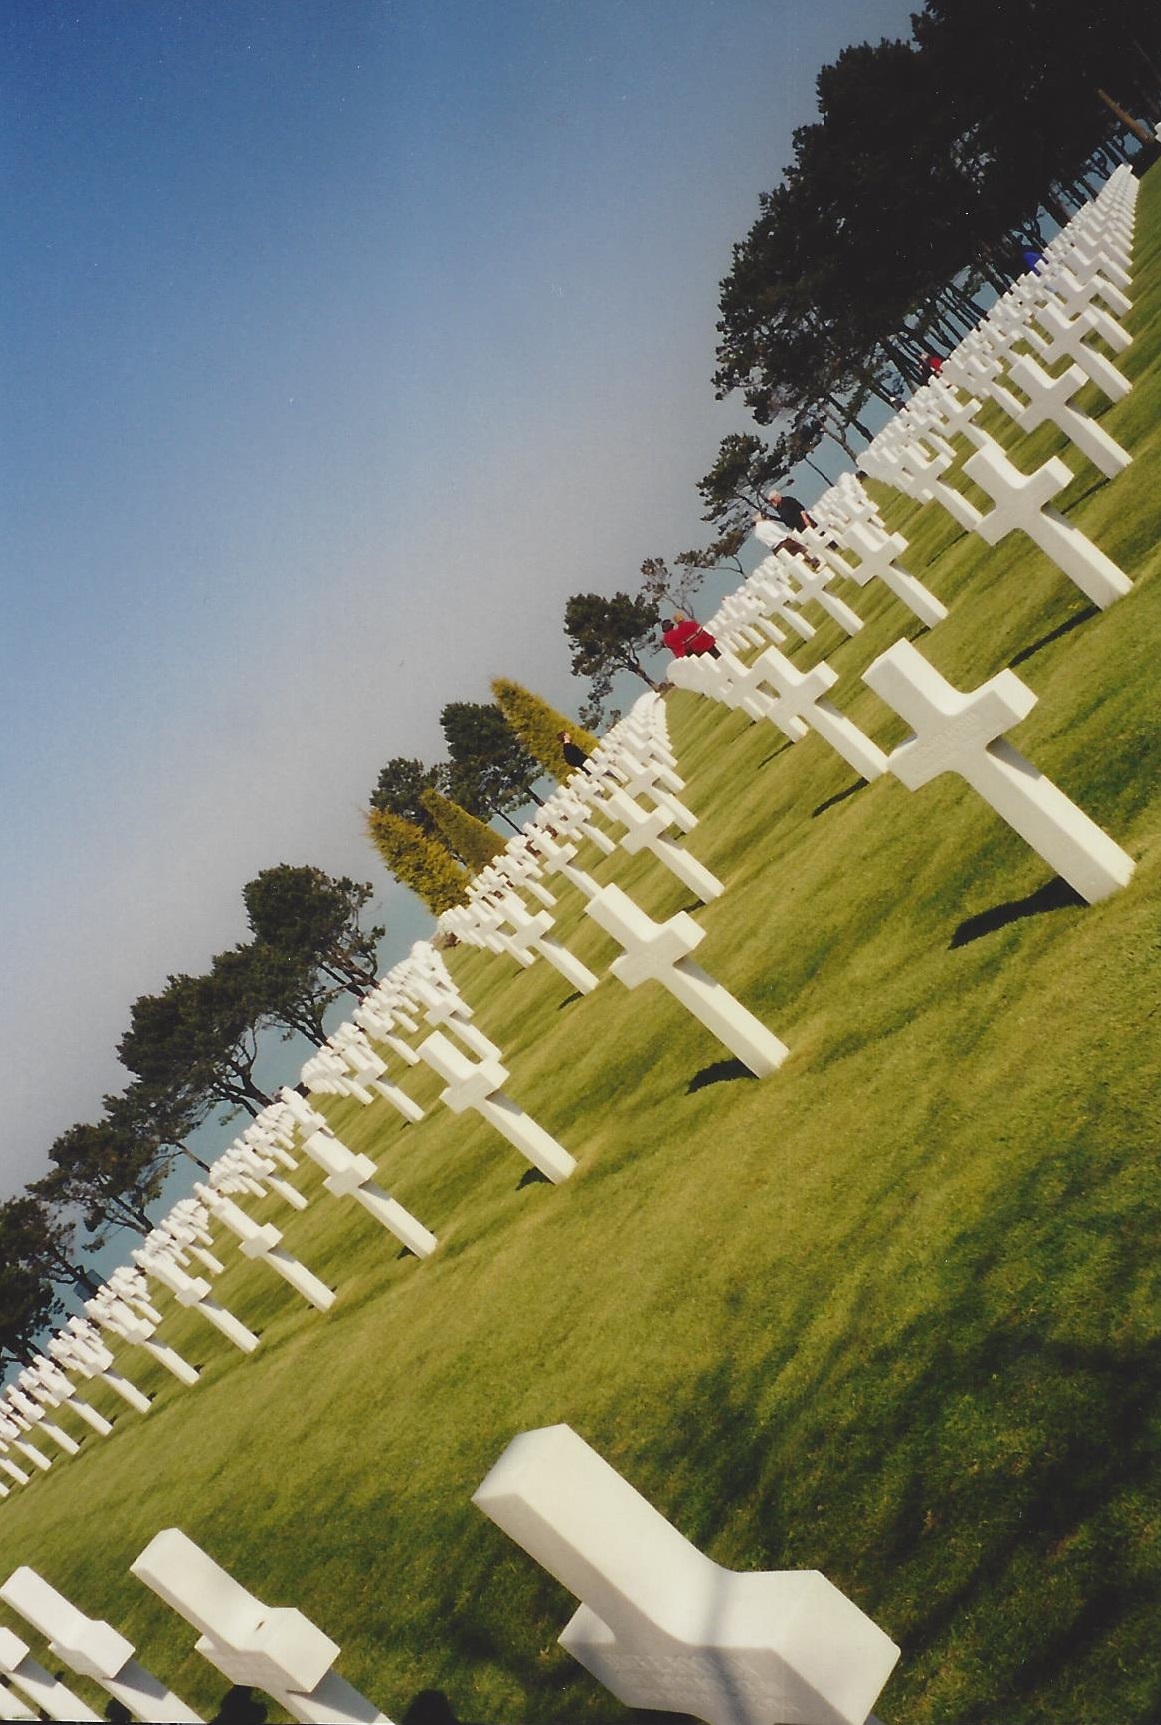 The Normandy American Cemetery and Memorial.  My own photo.